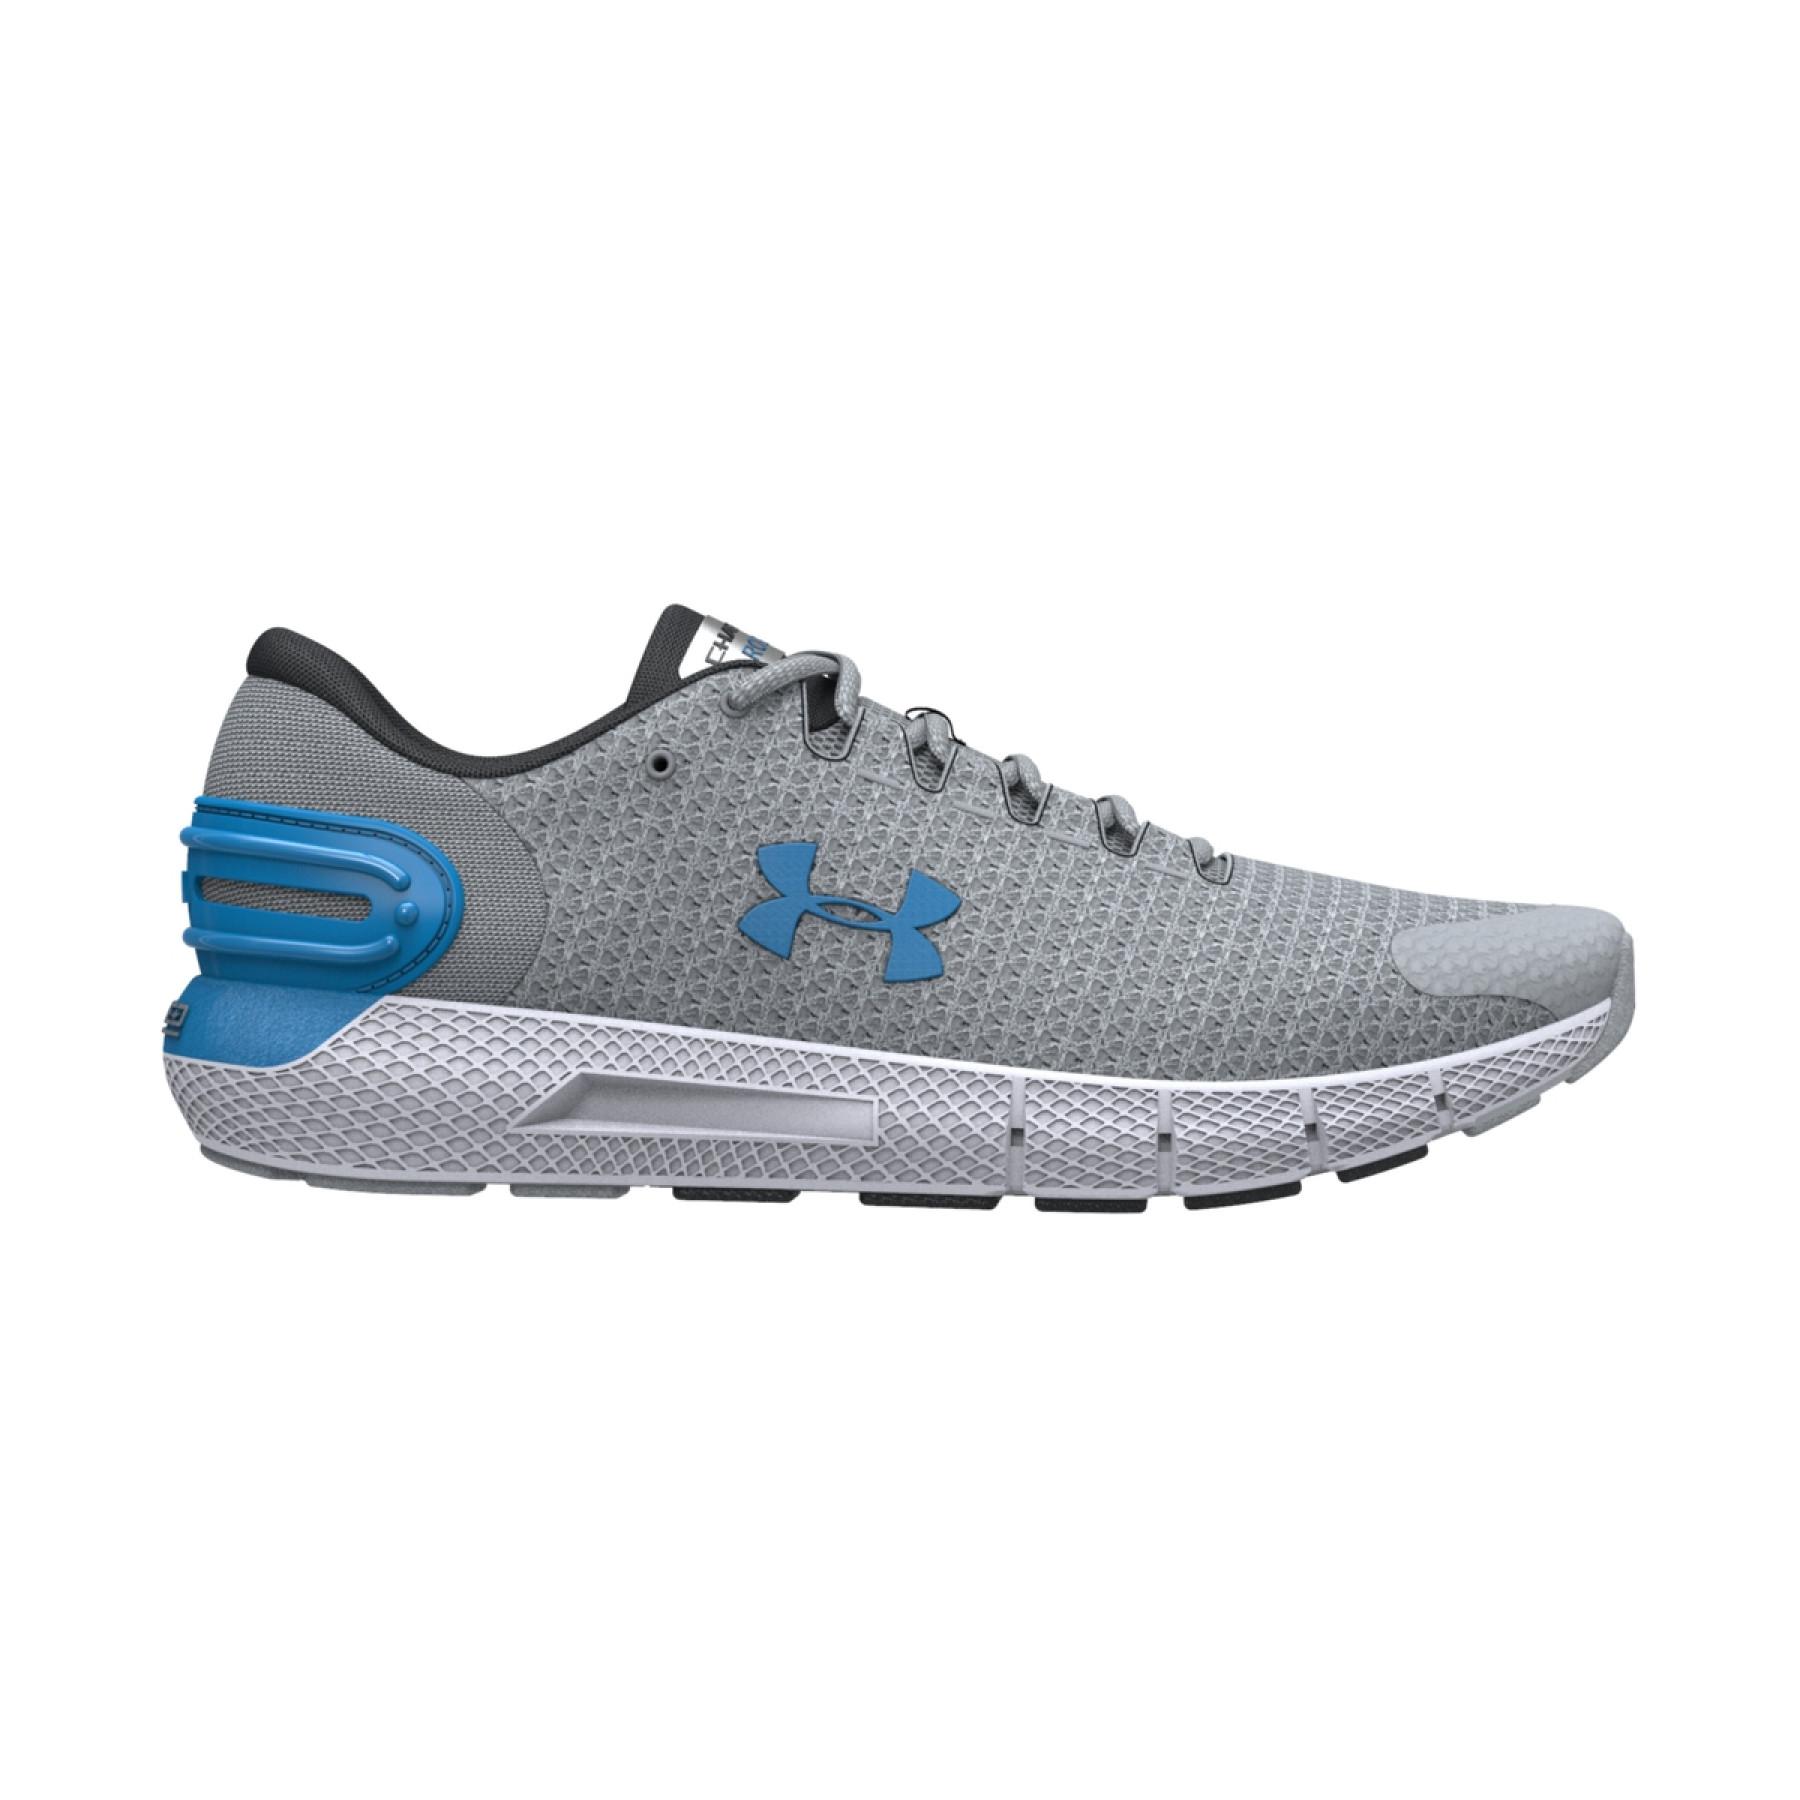 Under Armour Men's Charged Rogue 2.5 Running Shoe, Black (002